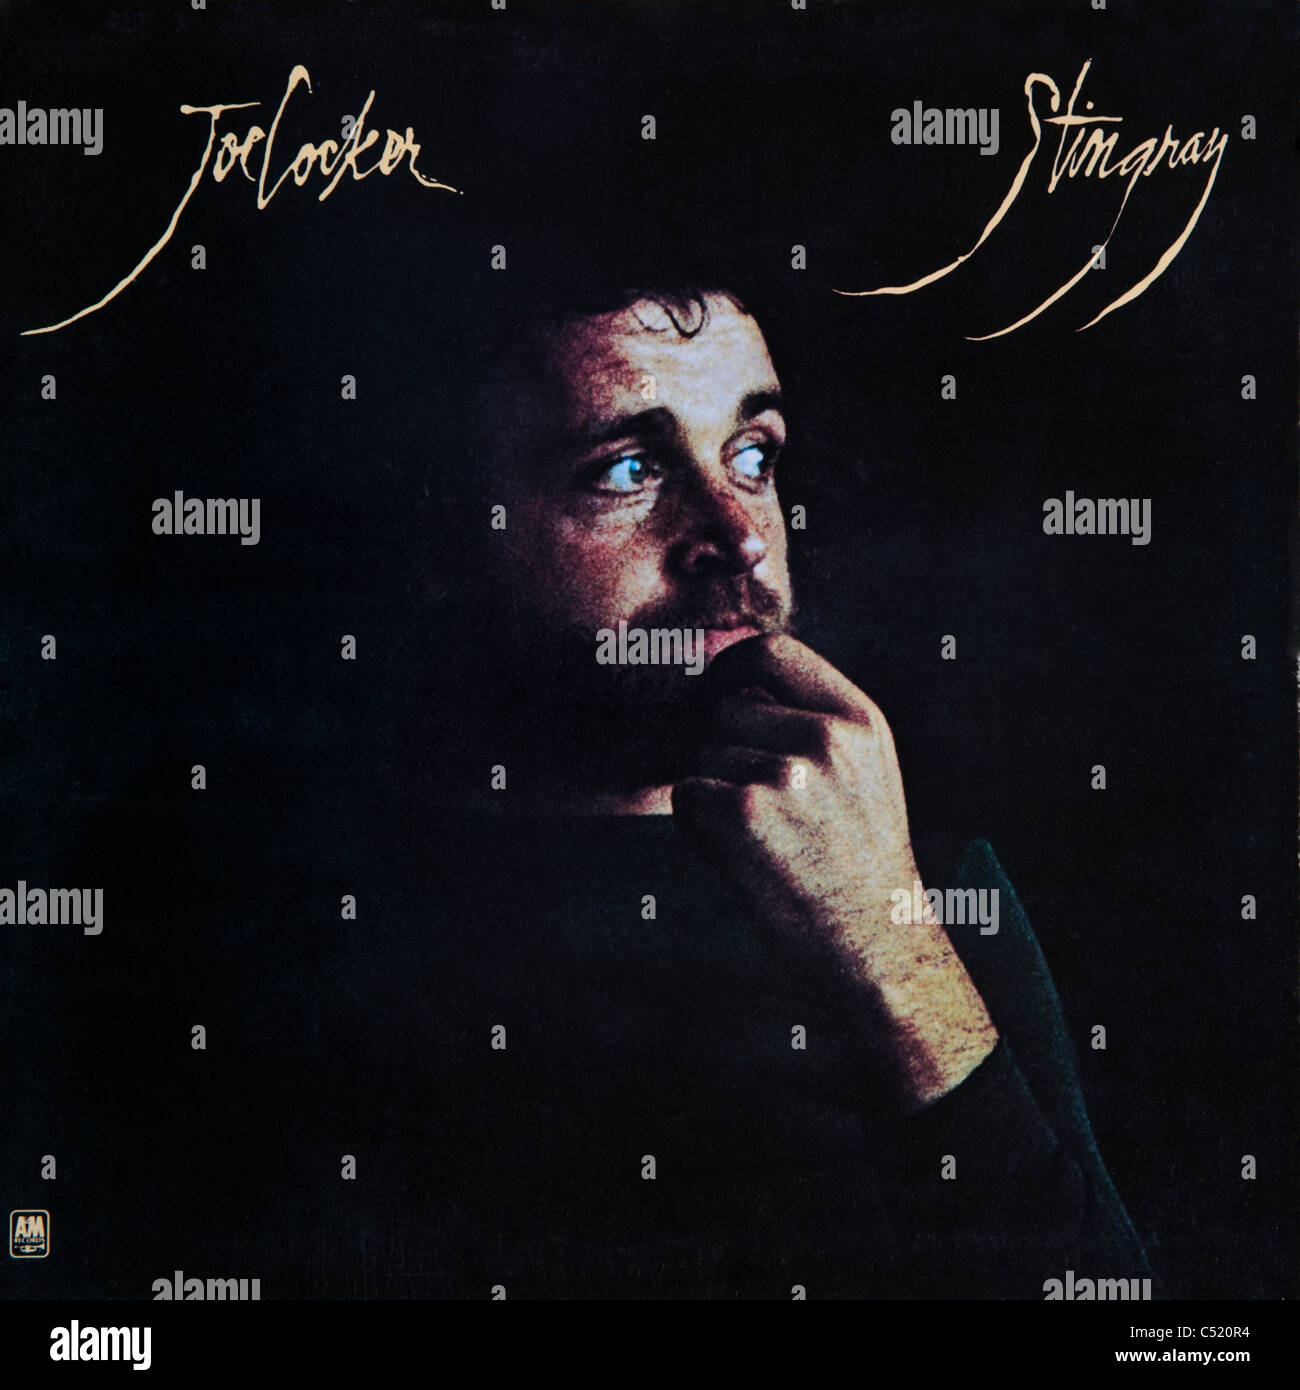 Cover of vinyl album Stingray by Joe Cocker released 1976 on A&M Records Stock Photo